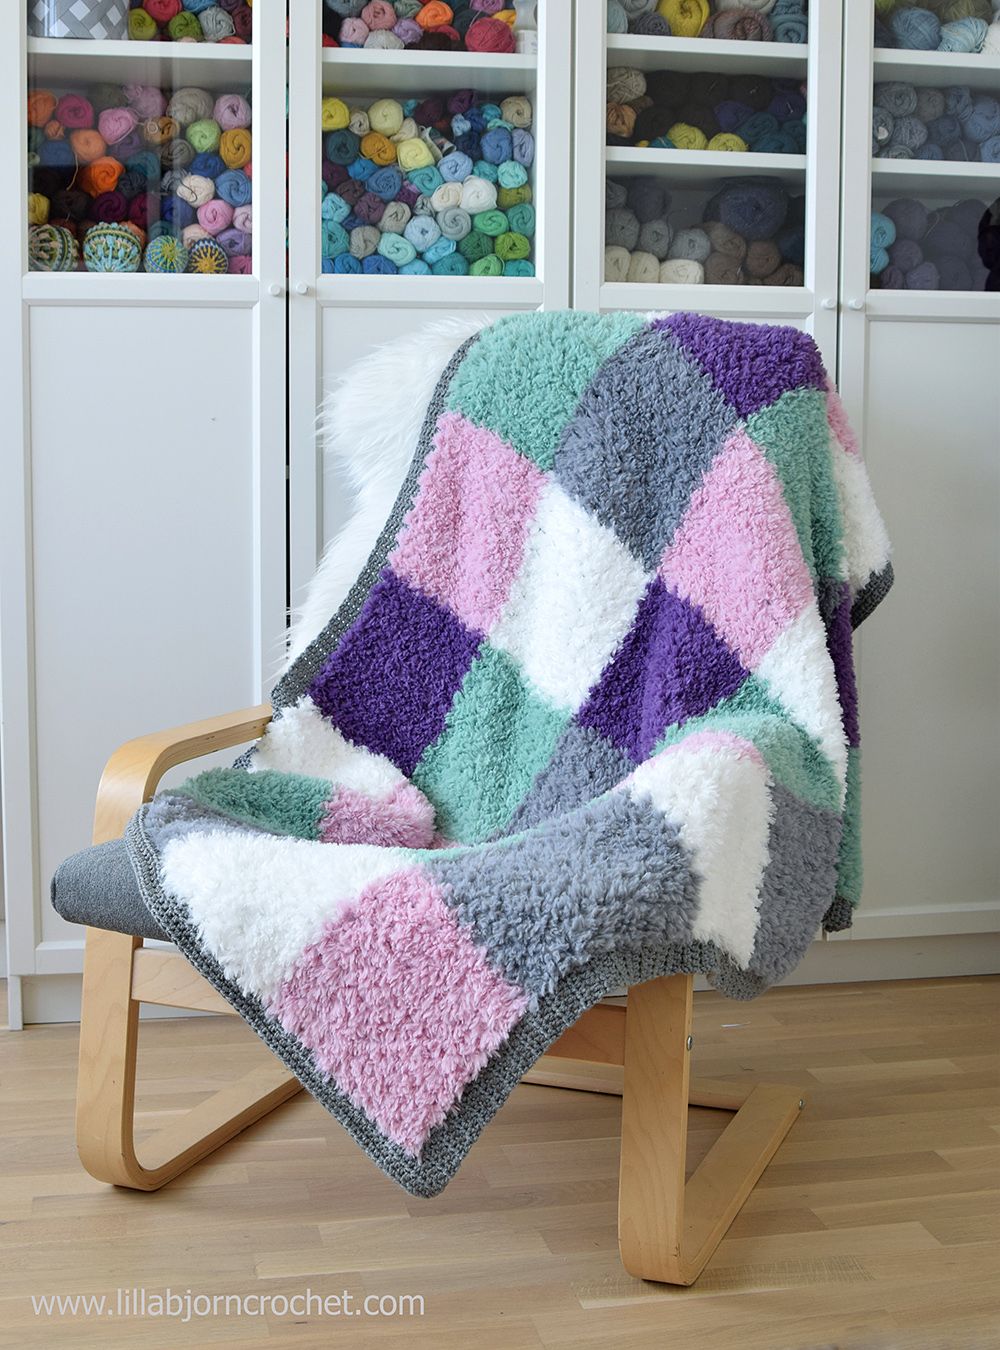 Crochet This SUPER FLUFFY Yarn With Me! 